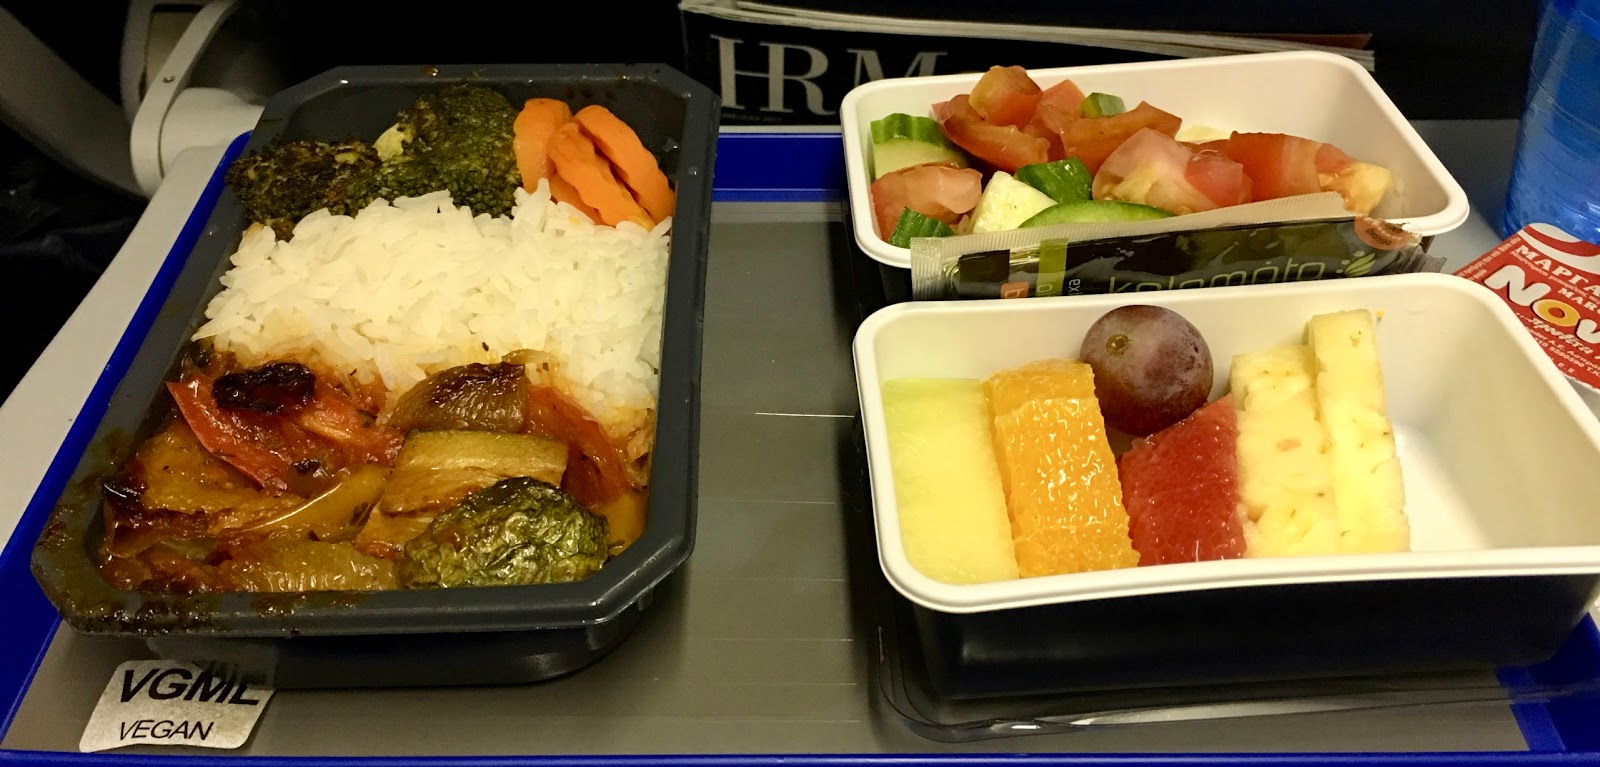 The Veracious Vegan Vegan Meals On United Airlines,Steaming Green Beans For Freezing